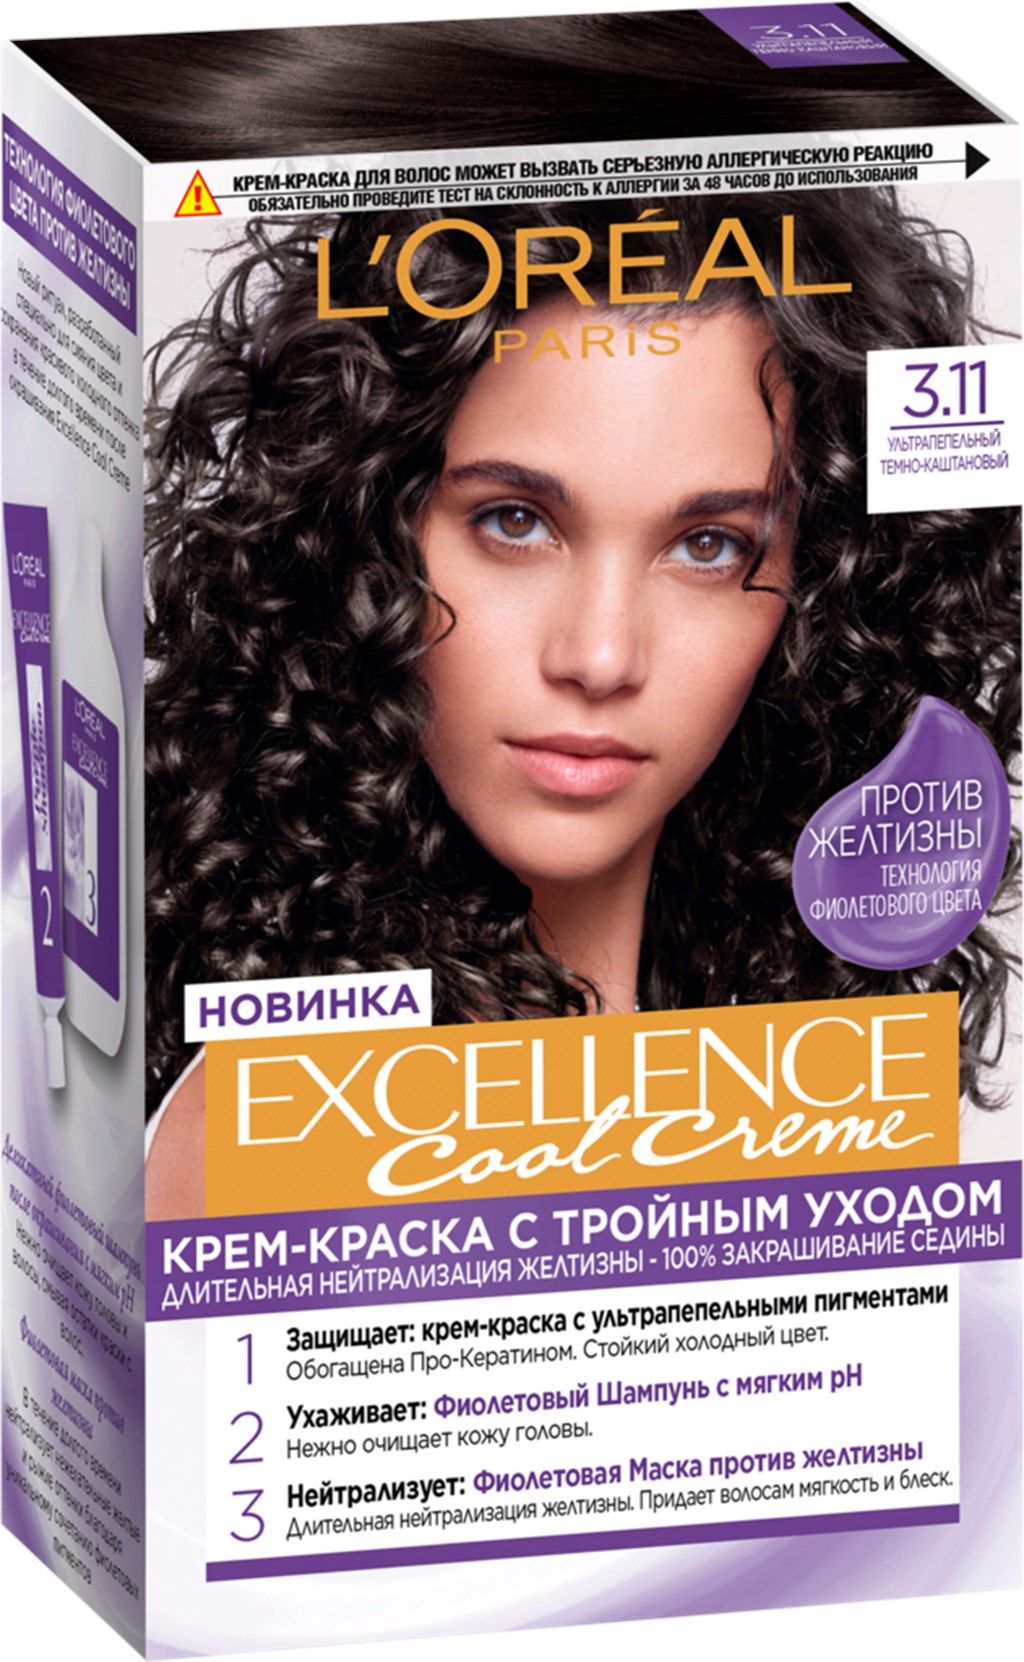 Excellence cool Creme 3.11